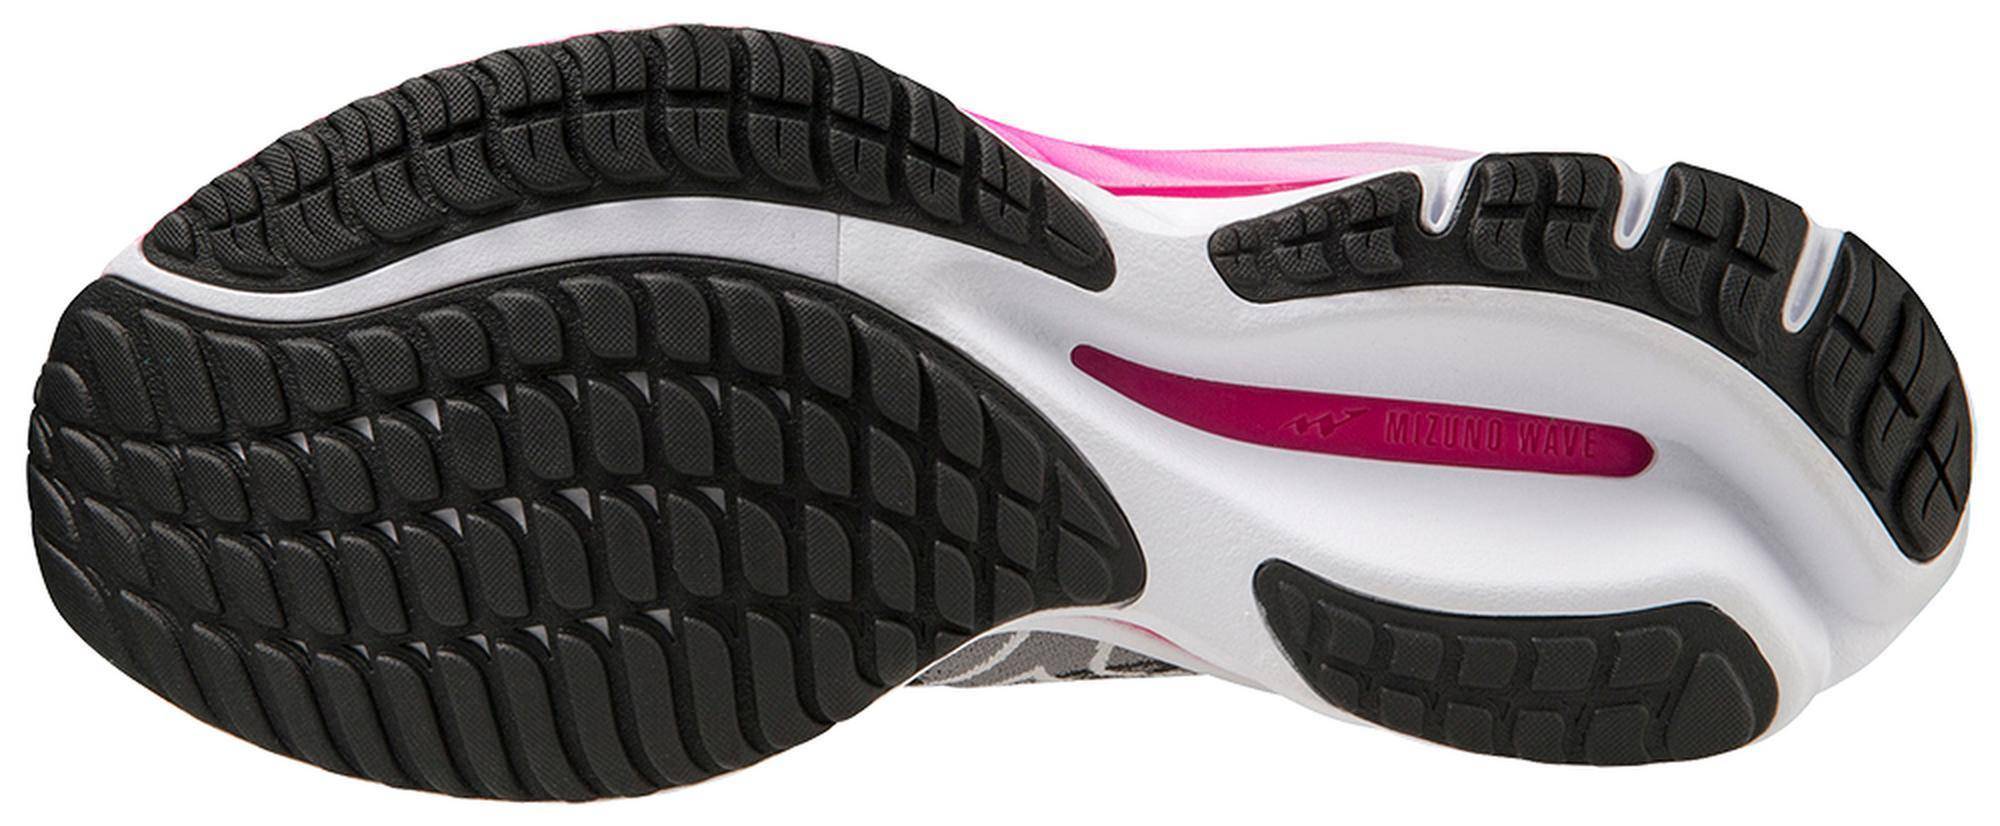 Women’s Project Zero Wave Rider 27 Running Shoes - The Shoe Collective